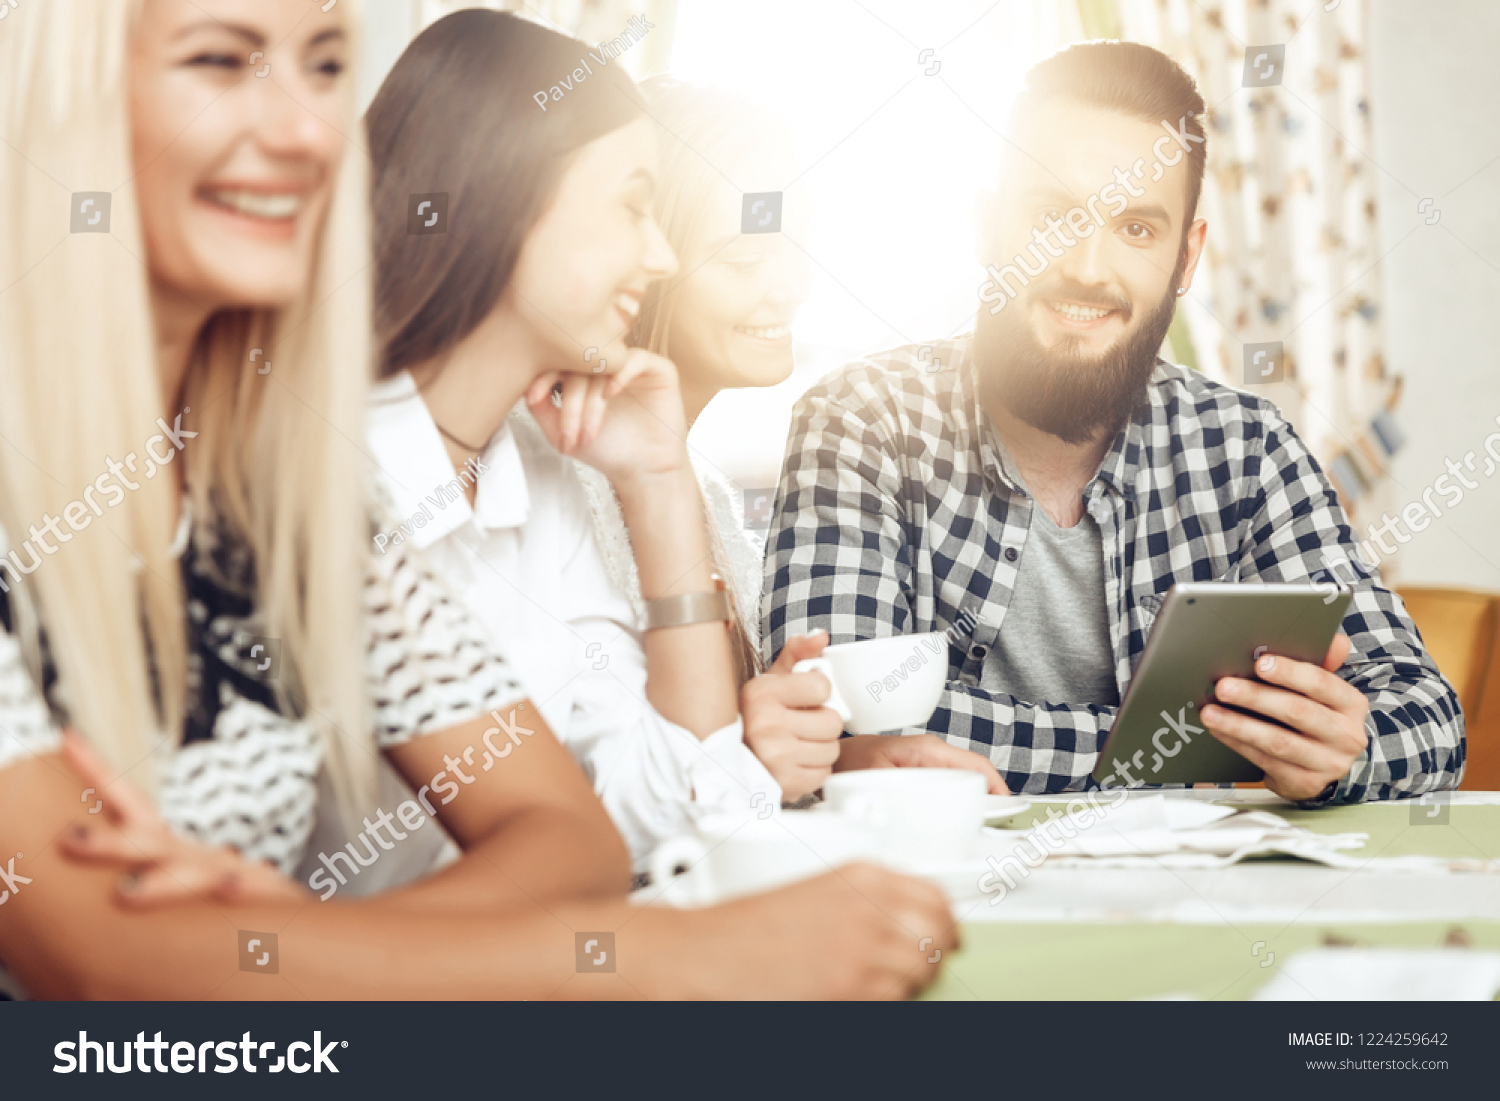 Happy friends are resting in cafe drinking coffee. A group of smiling men and women are sitting at a table in a cafe with a tablet. The guy looks at the tablet funny information that all the fun #1224259642